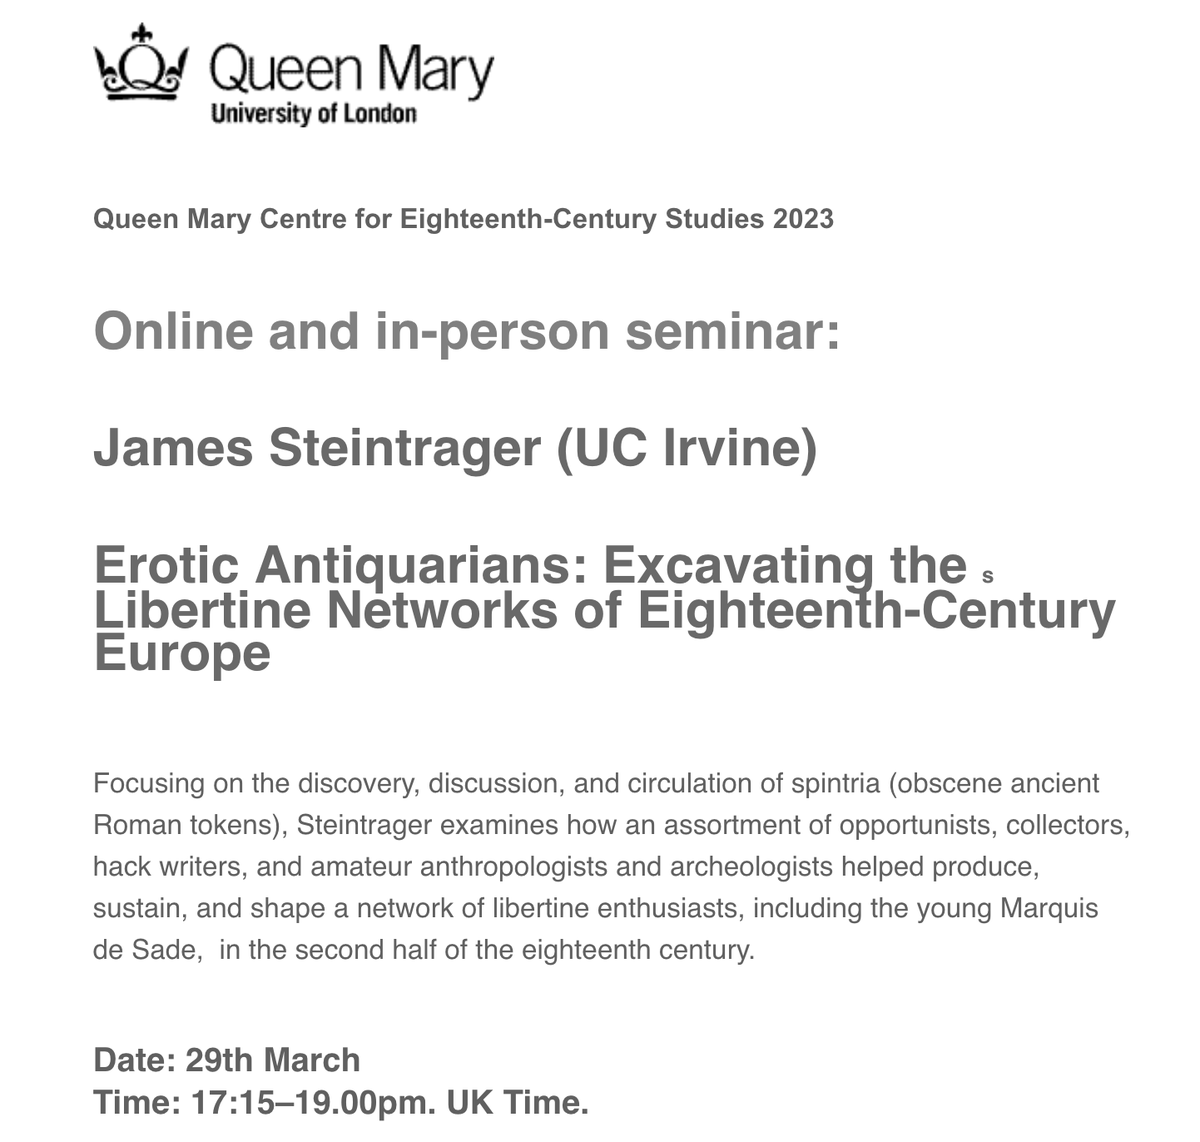 QMCECS Seminar: Wednesday 29 March: James Steintrager (UC Irvine) on Libertine Networks of 18th Century Europe. 5-7pm. In-person at Mile End (FB 1.02.6). Online sign-up: qmul.ac.uk/sed/english/re…. All welcome.